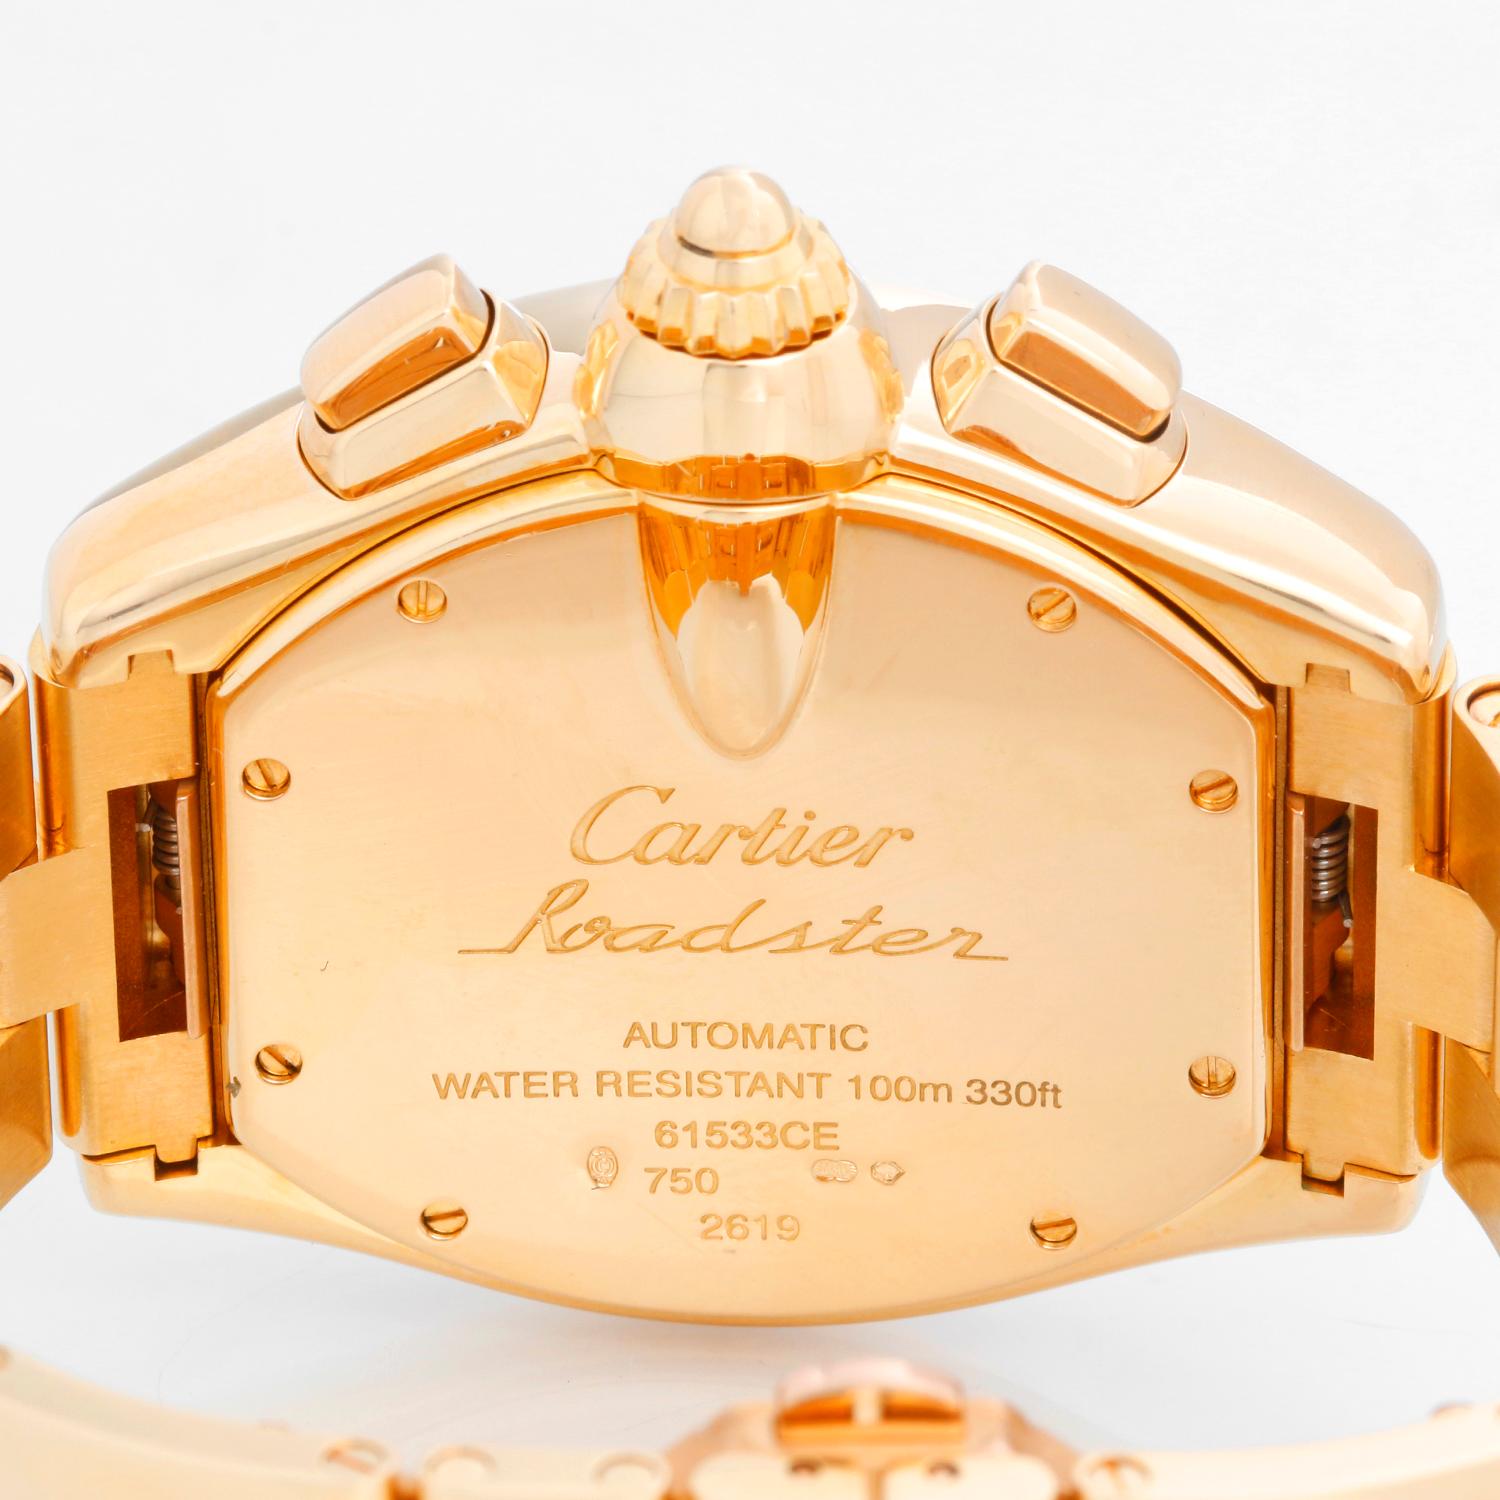 Cartier Roadster Chronograph XL 18k Yellow Gold Men's Watch 2619 In Excellent Condition In Dallas, TX